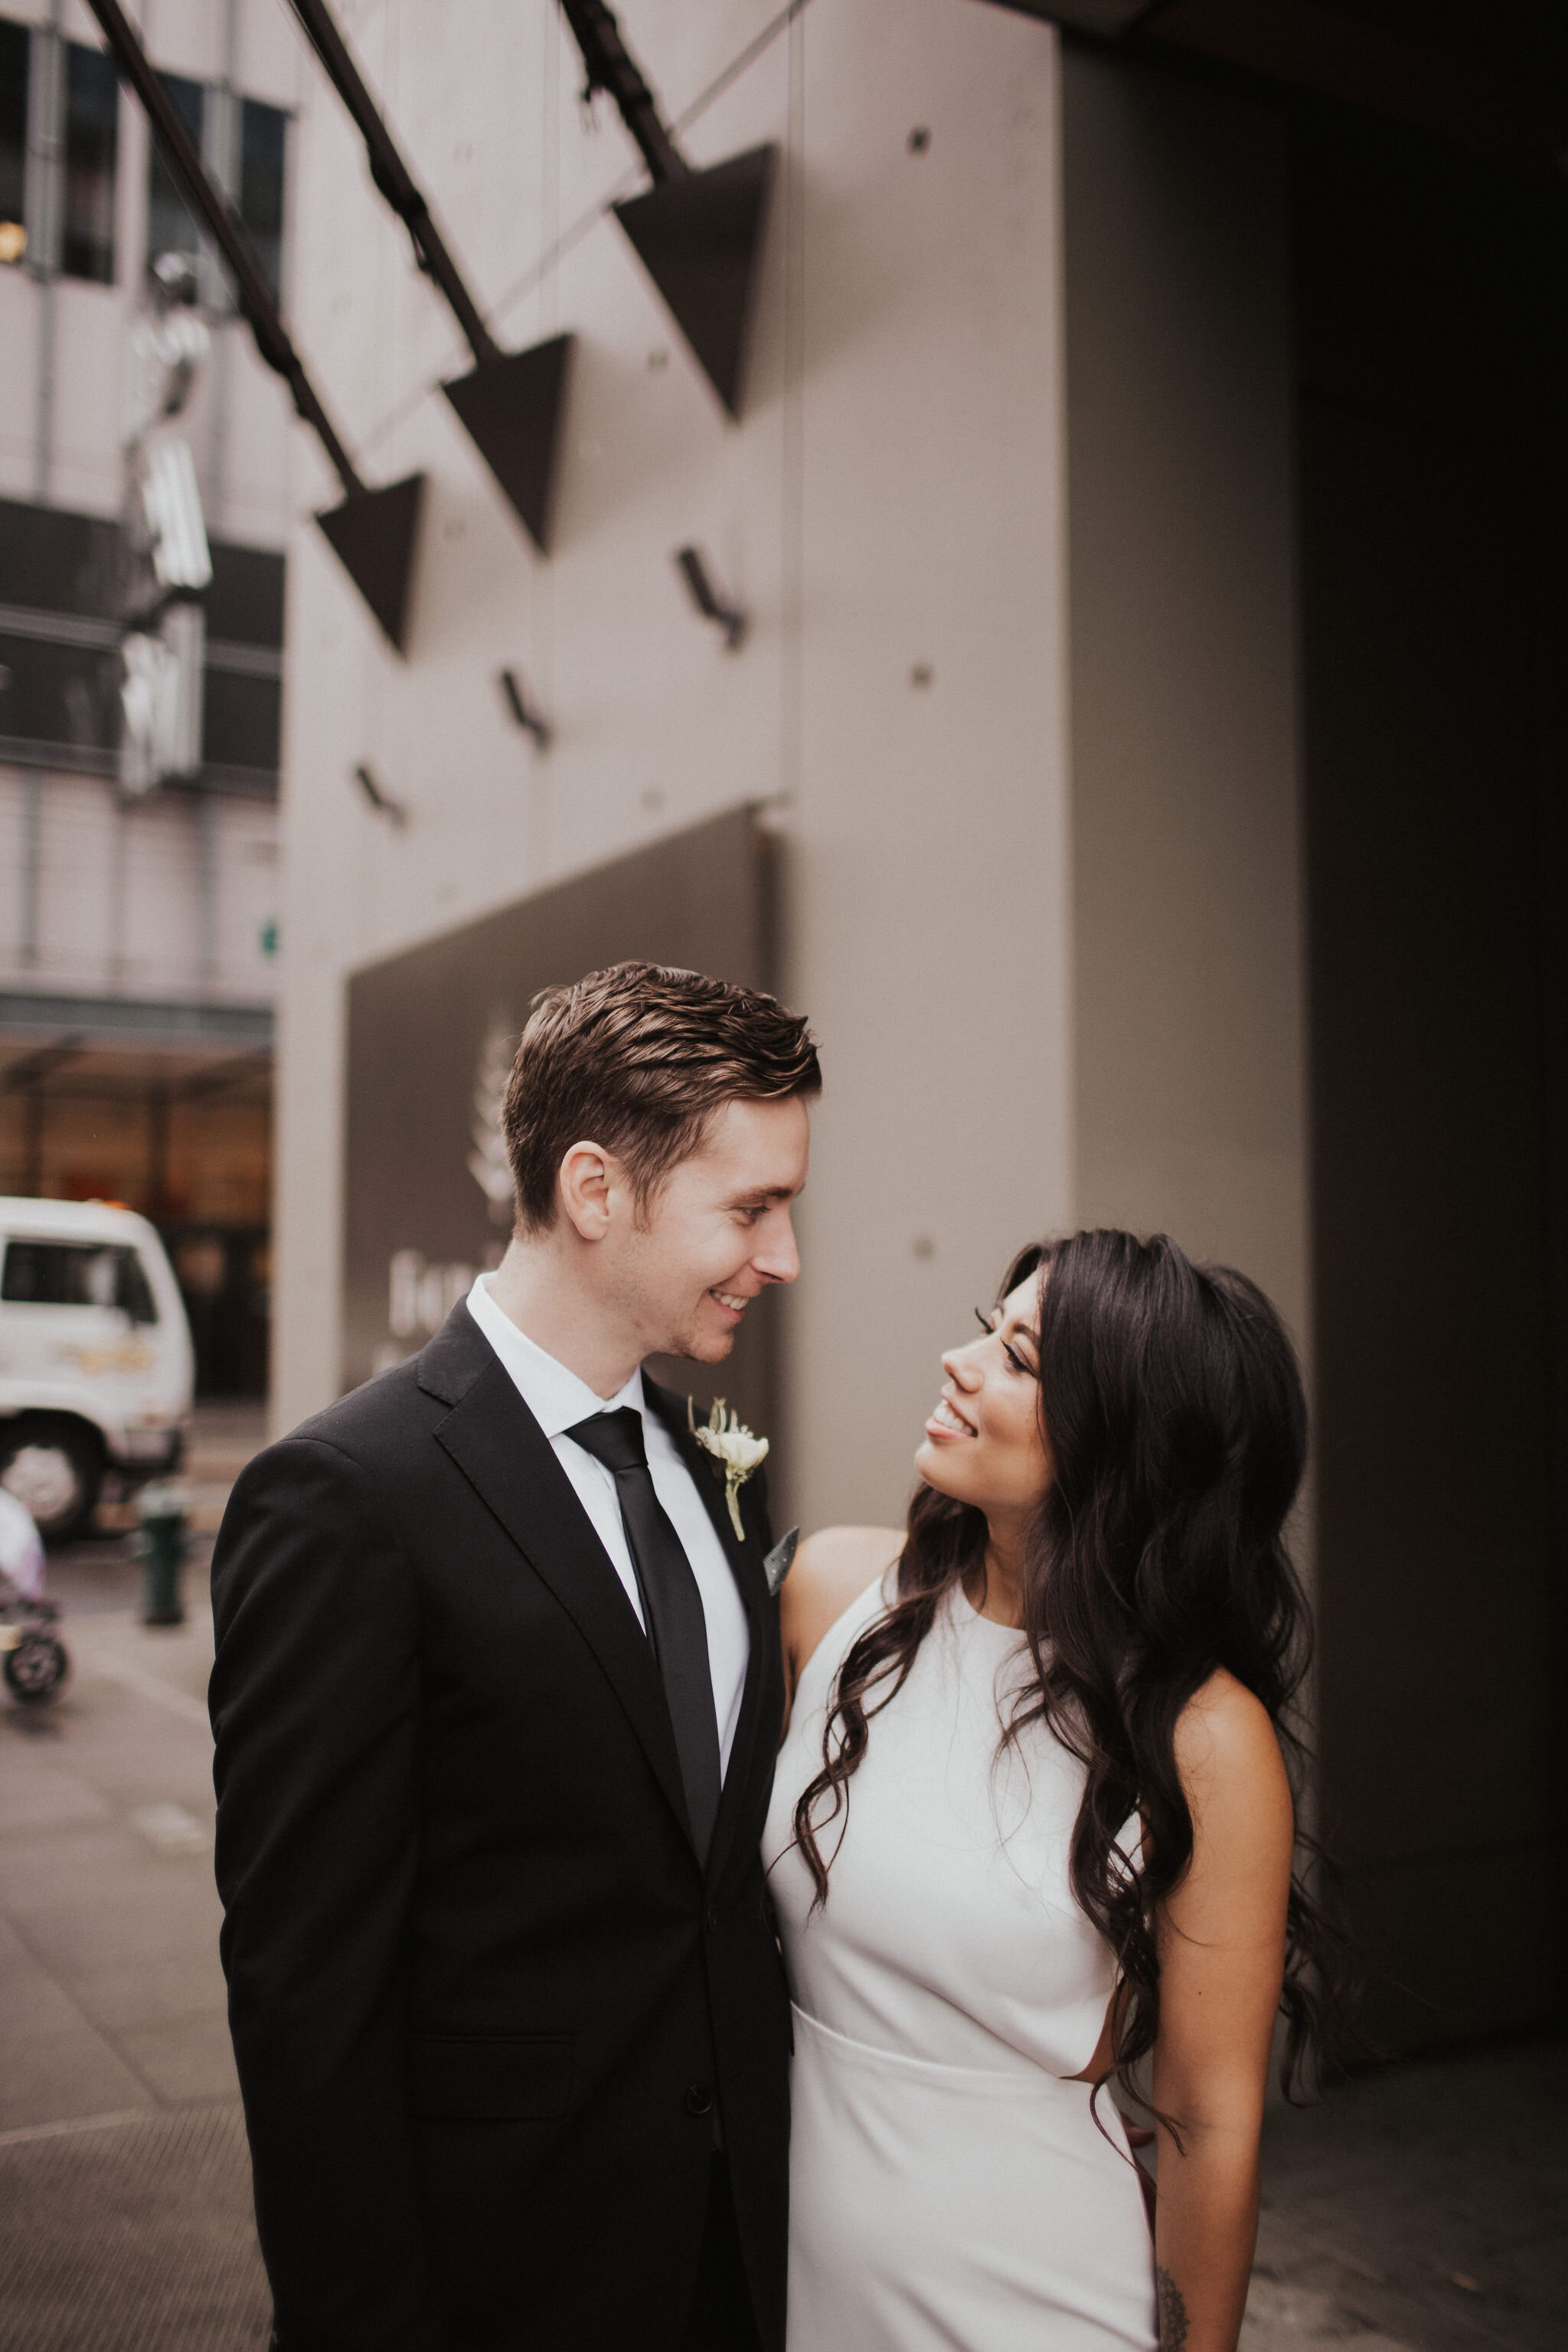 Sykes-couples-session-august-muse-images-seattle-wedding-photographer-within-sodo-four-seasons-140.jpg